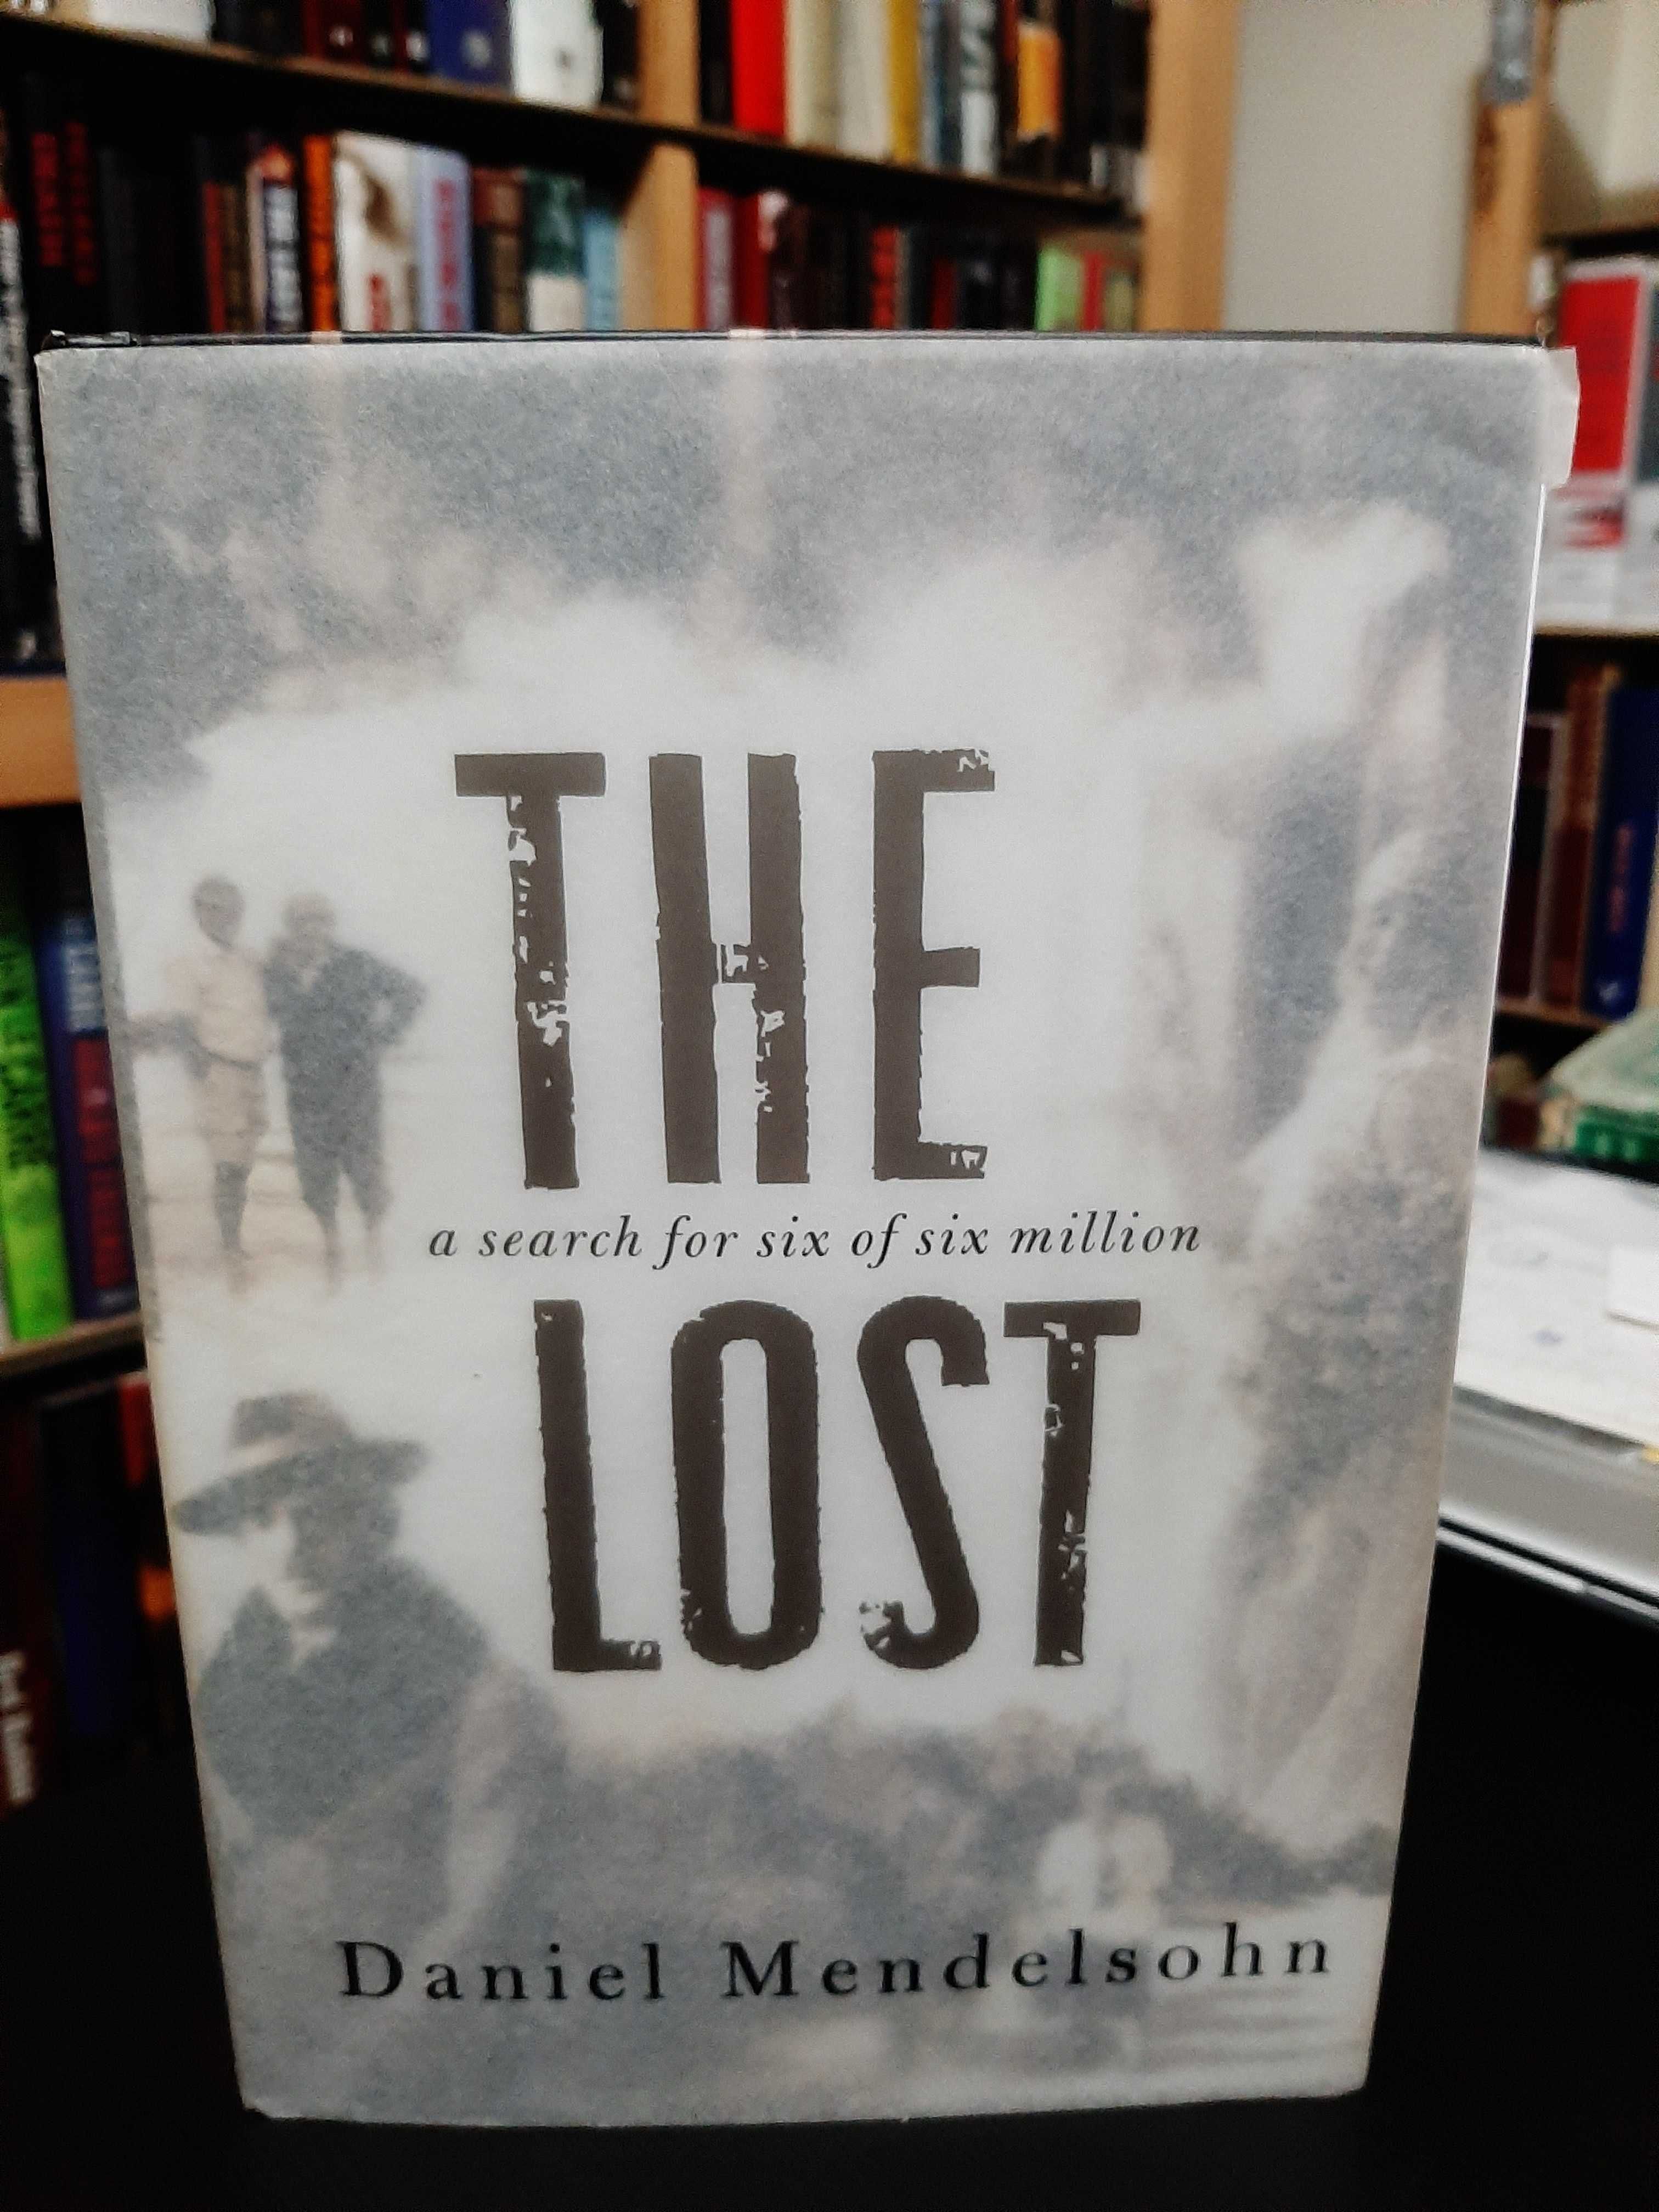 Daniel Mendelsohn – The Lost: A Search for Six of Six Million